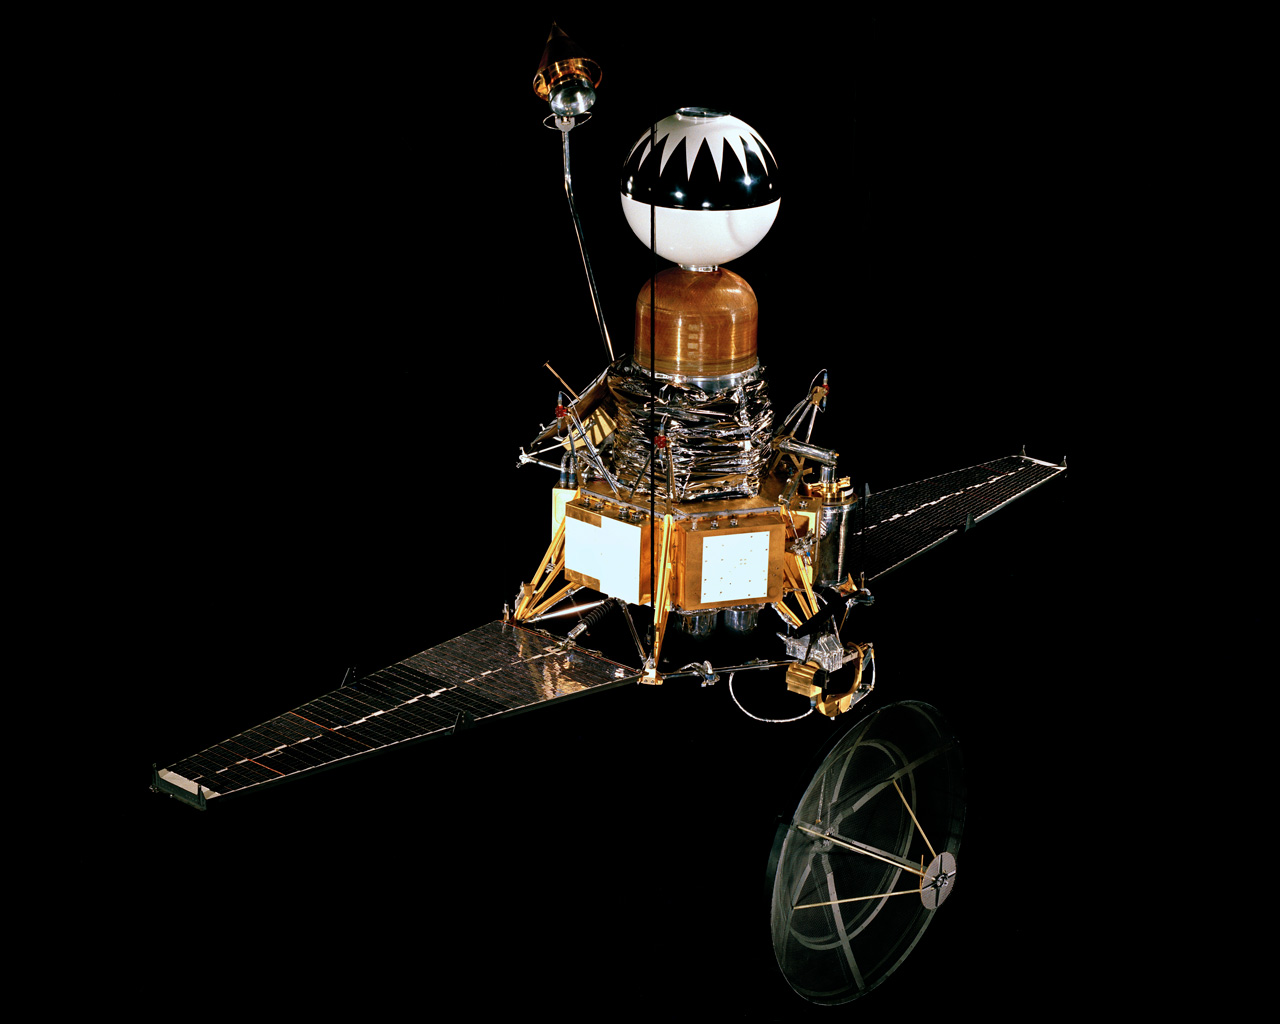 Photo of spacecraft with a black background.